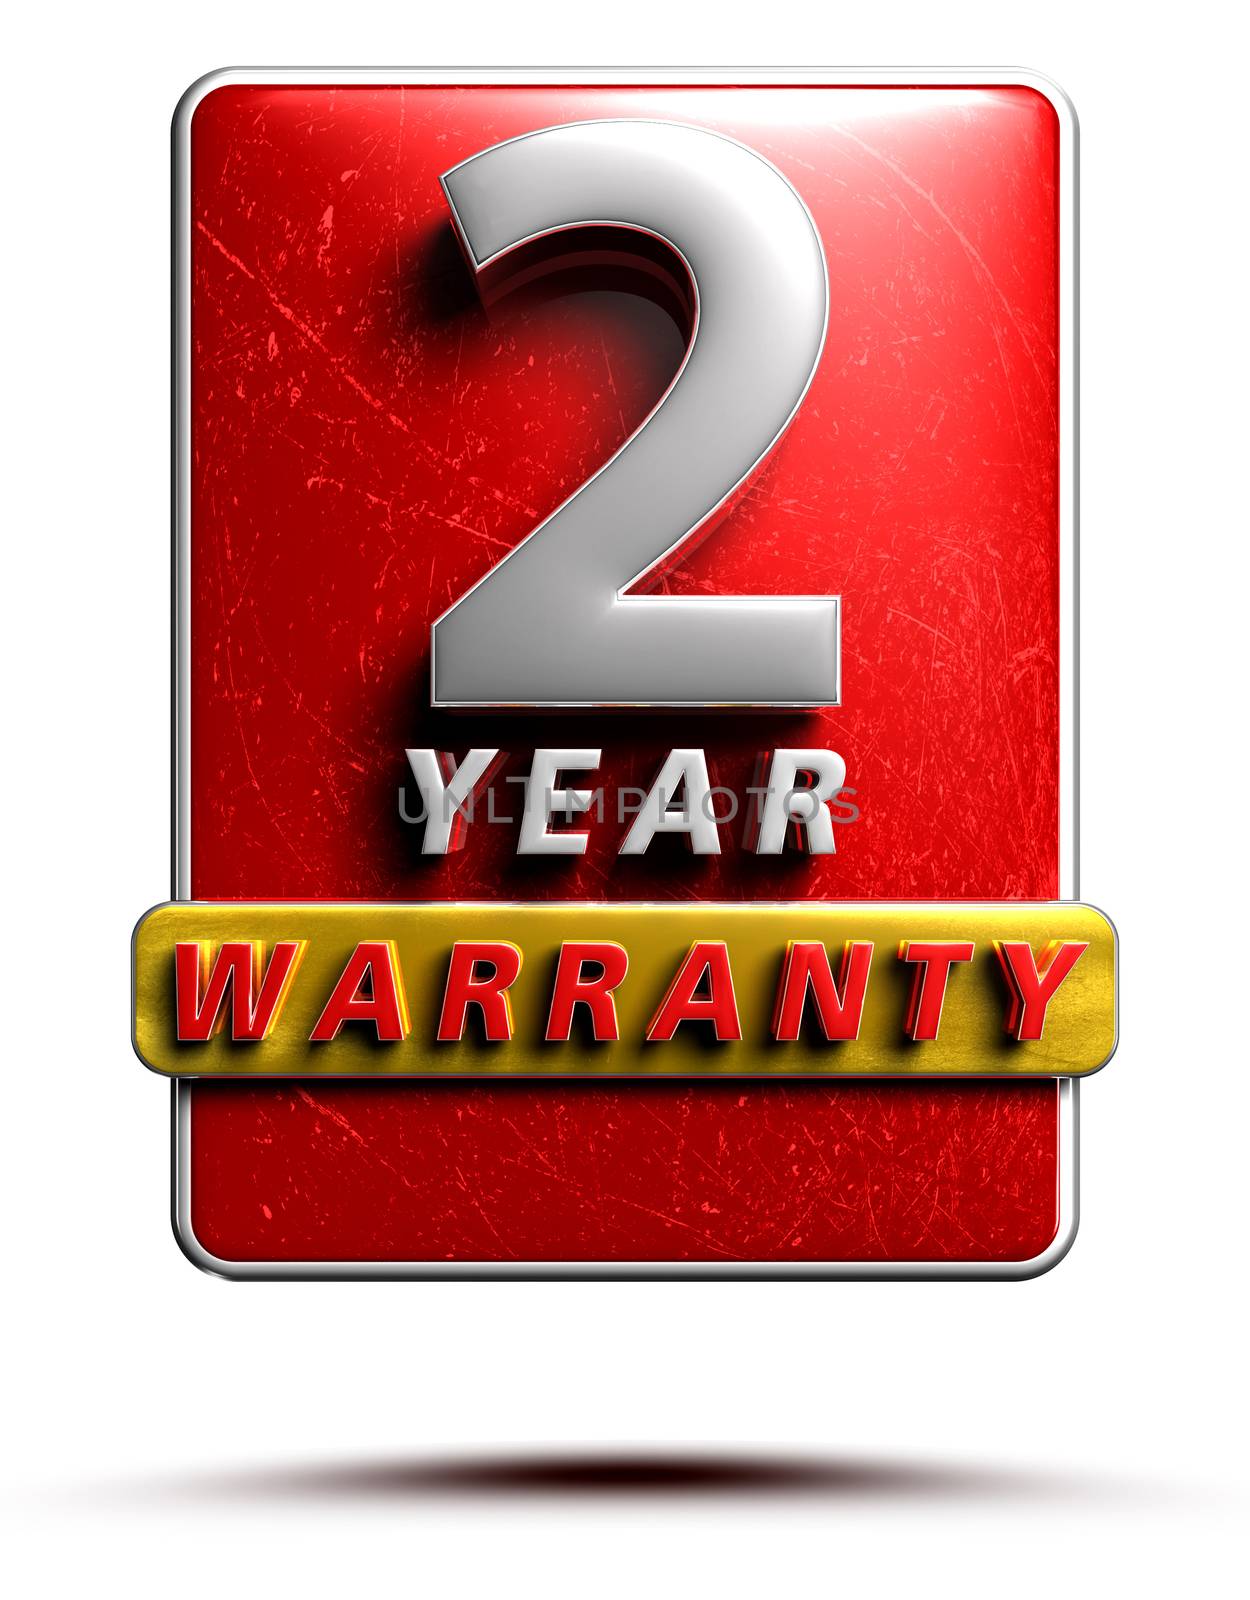 Warranty label 3D illustration 2 years Red Color Numbers in stainless steel Isolated on a white background. (With Clipping Path).